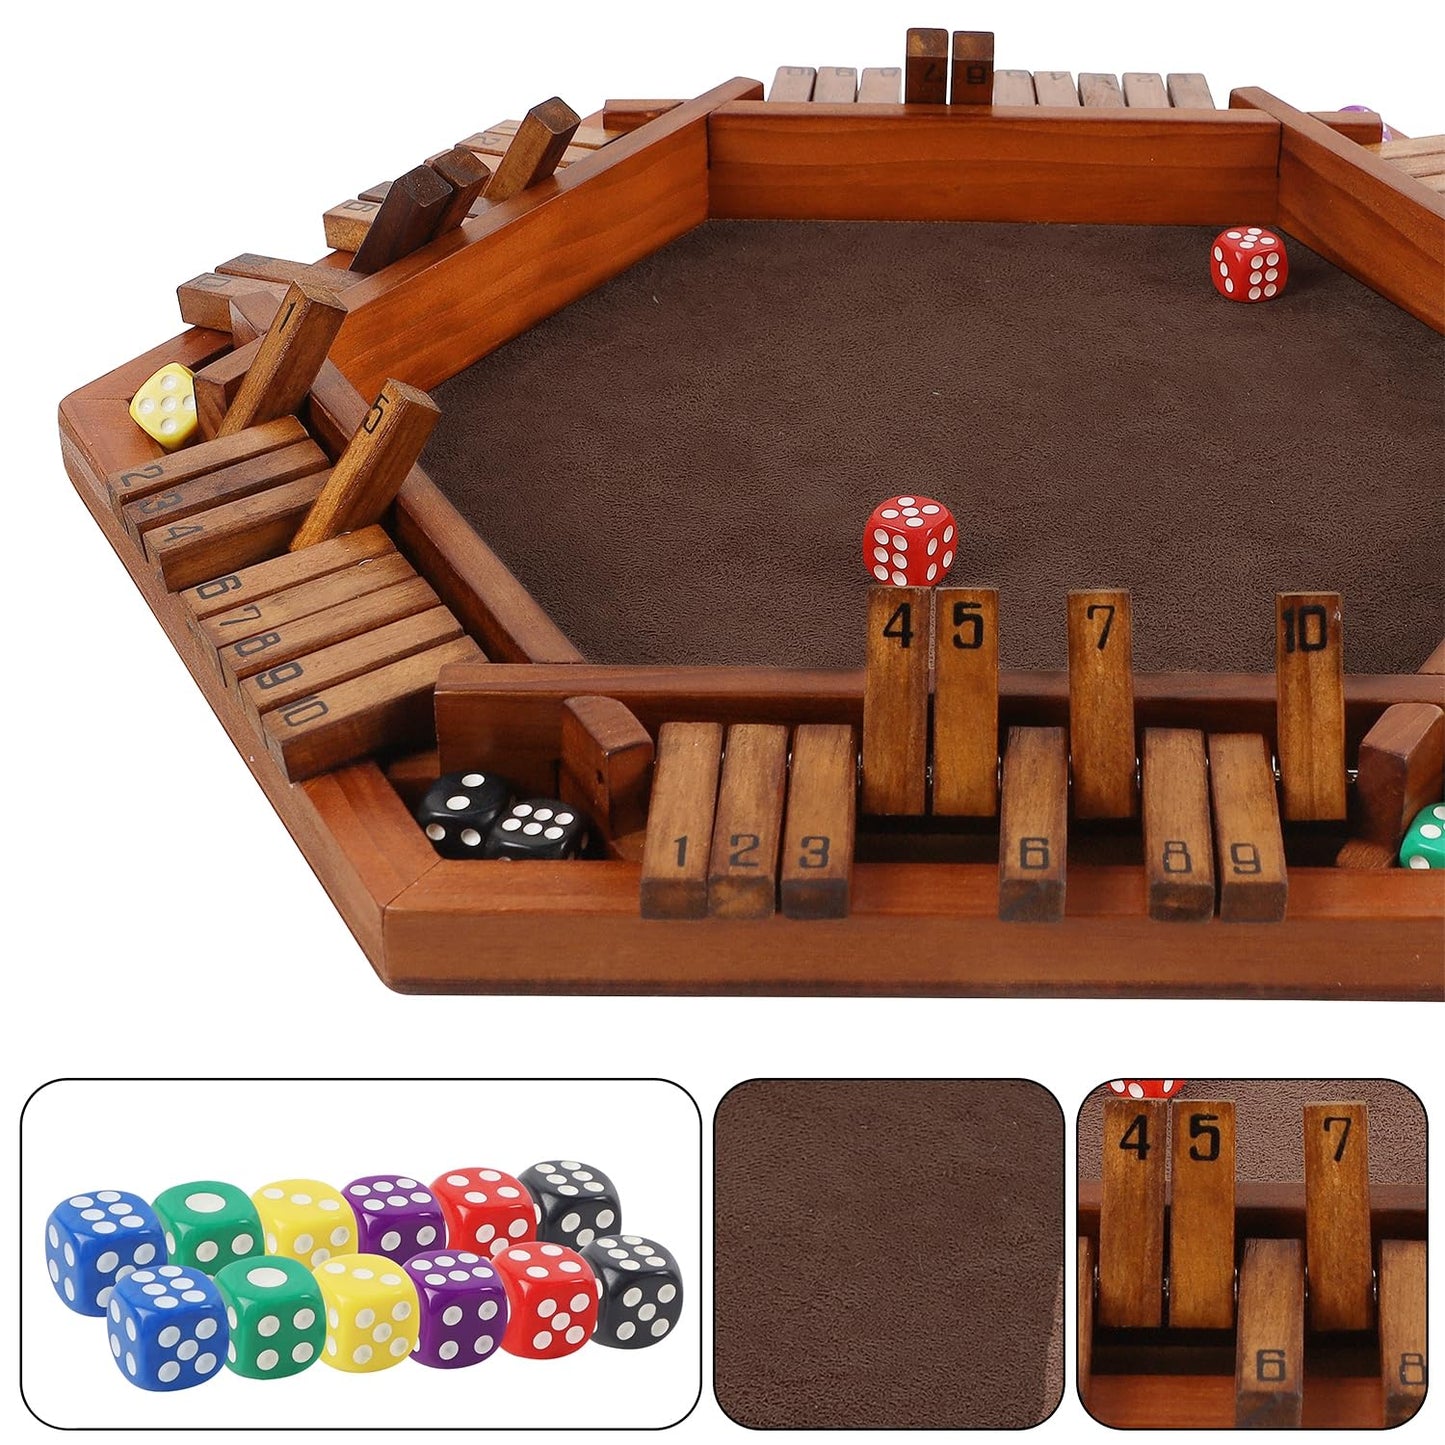 Juegoal Wooden Shut The Box Dice Game for 1-6 Players, Upgrade Tabletop Board Game with 12 Dice for Kids Adults Families, Classics Travel Portable